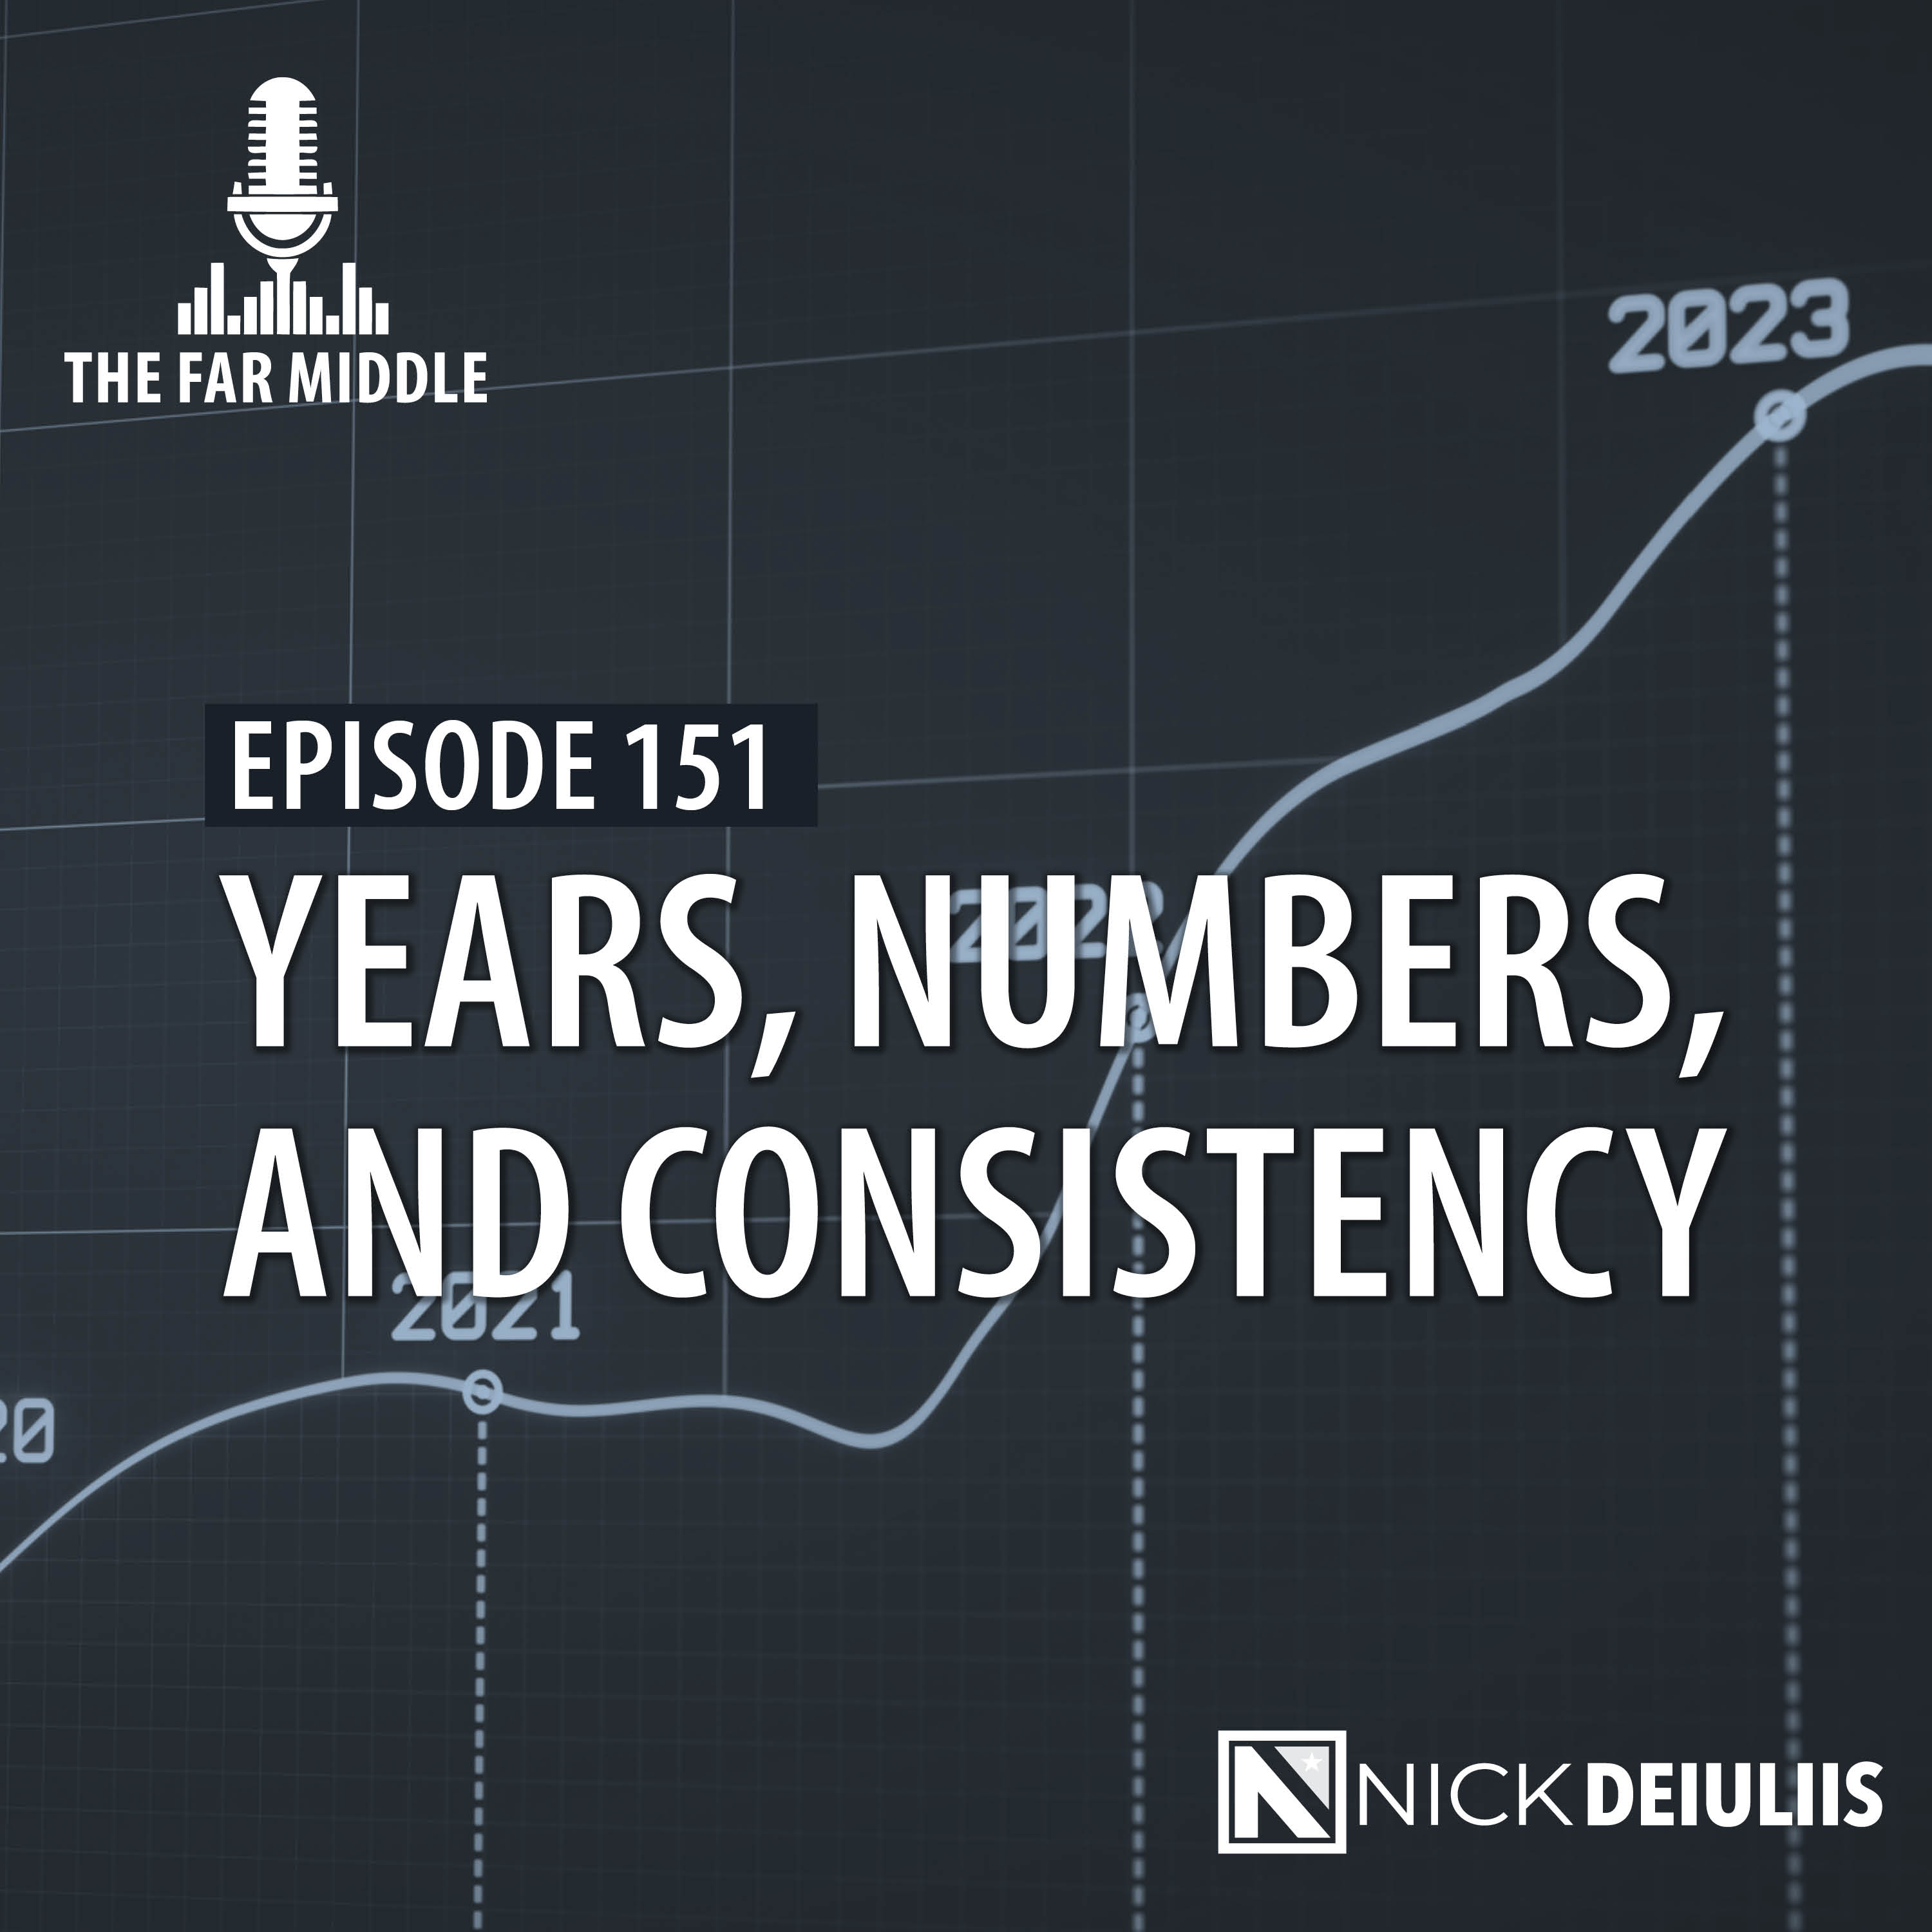 Years, Numbers, and Consistency